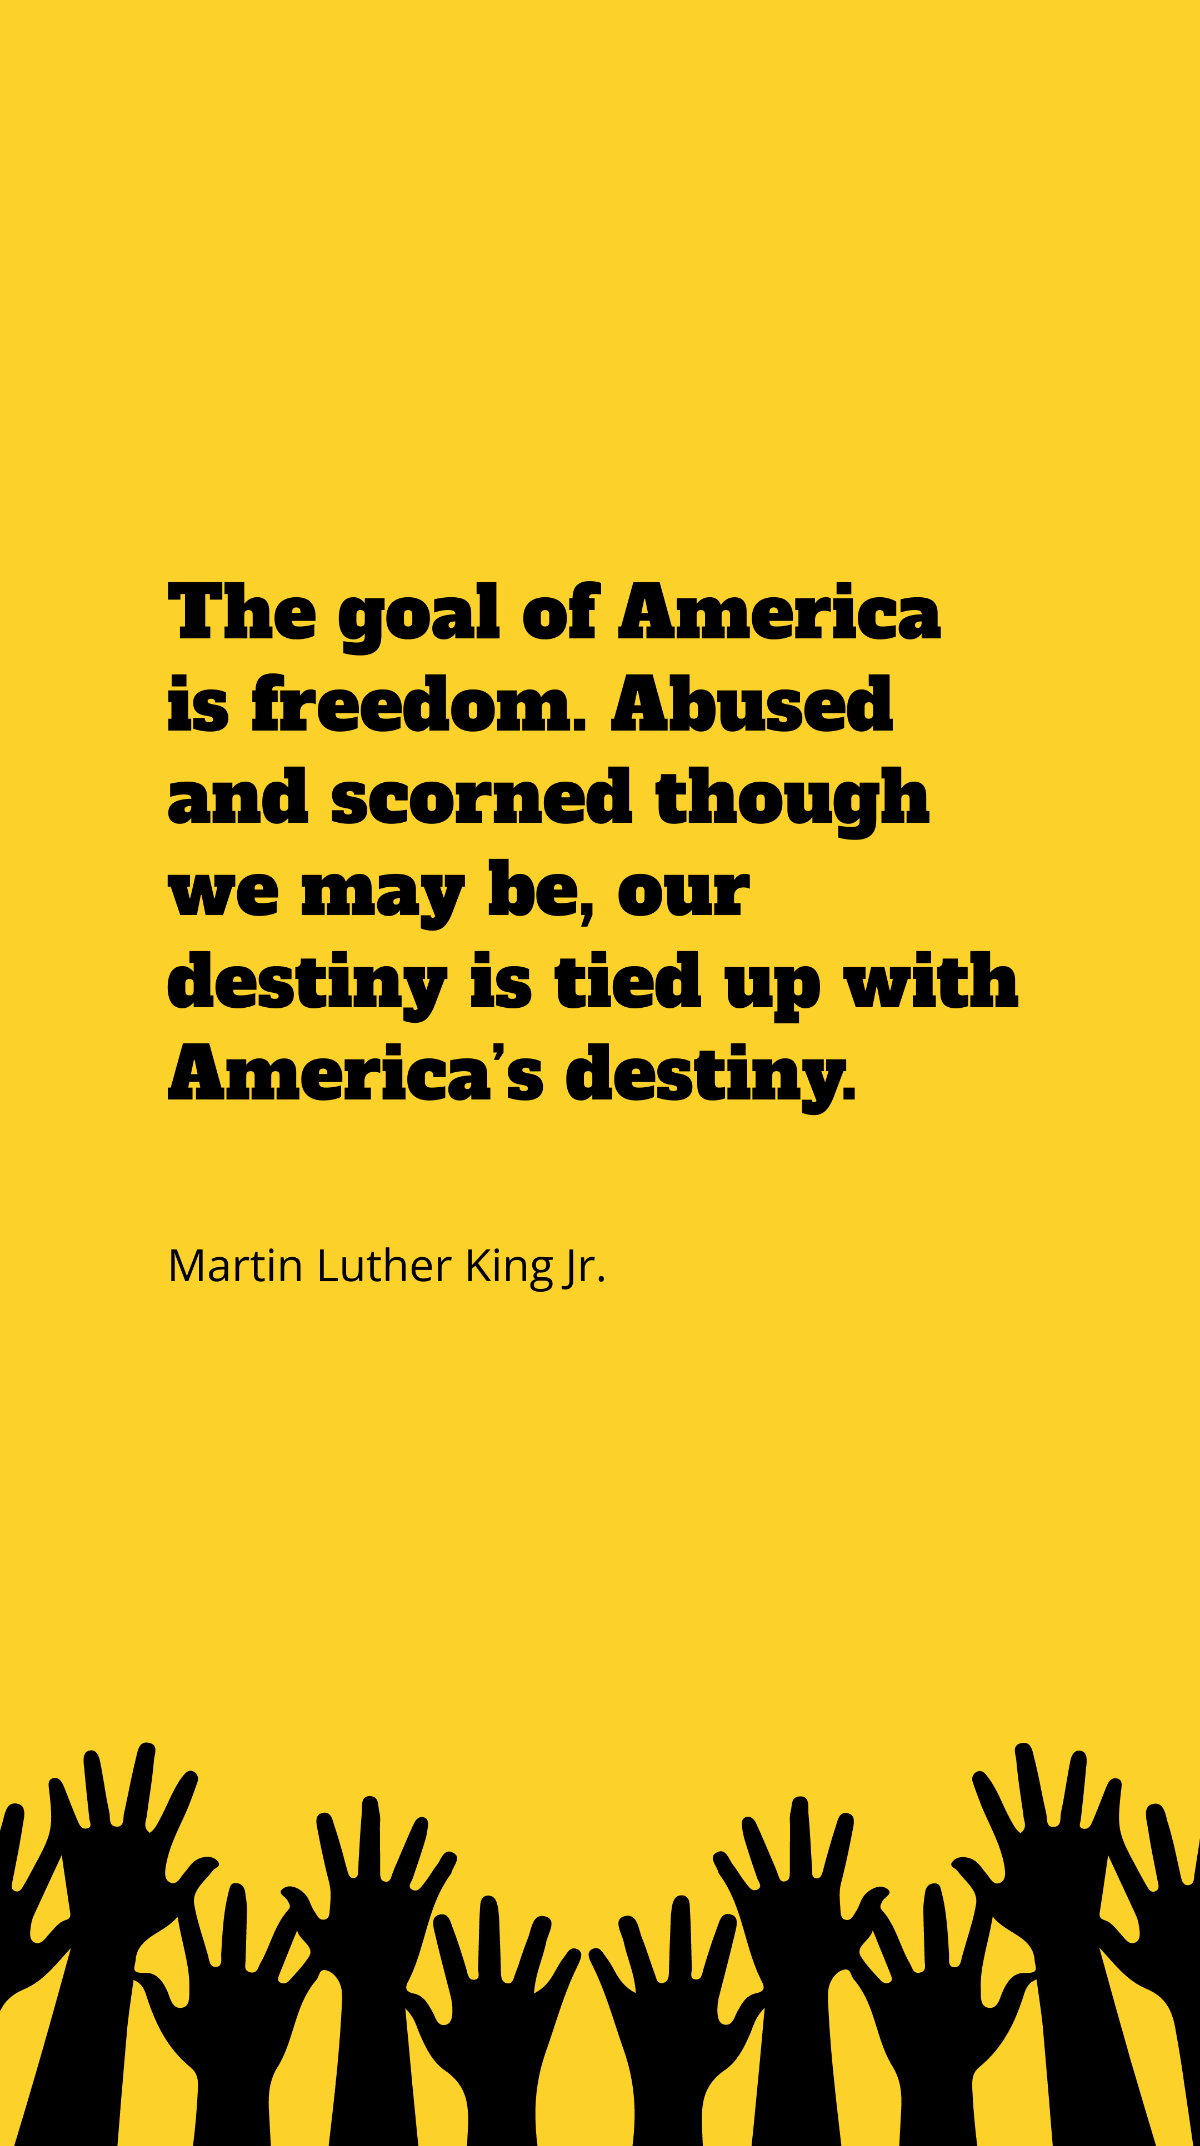 Martin Luther King Jr. - The goal of America is freedom. Abused and scorned though we may be, our destiny is tied up with America’s destiny. Template